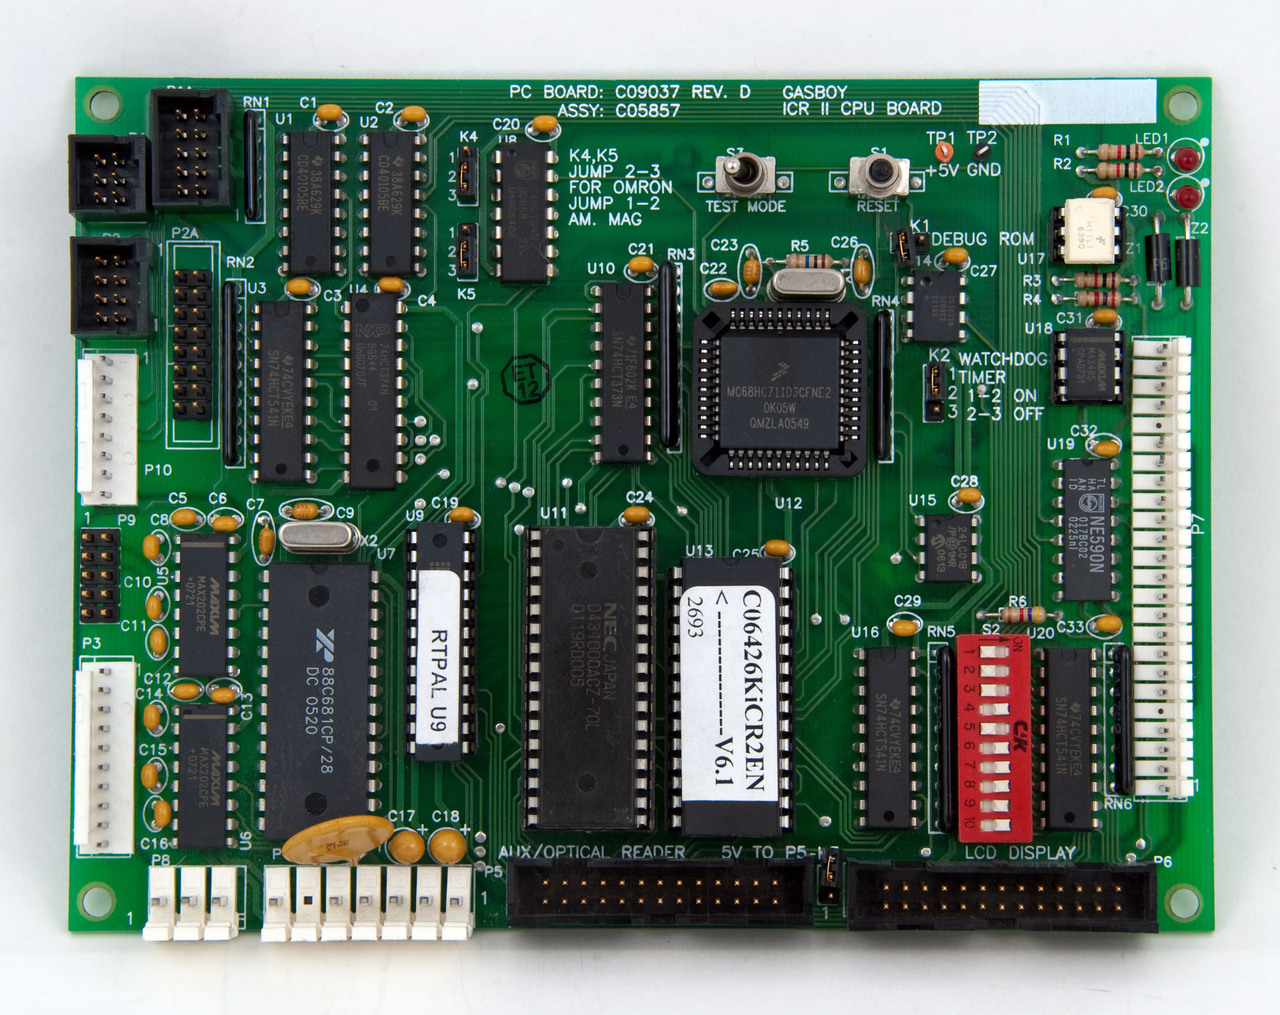 NEW STYLE ICR2 CPU BOARD, Fits Gilbarco